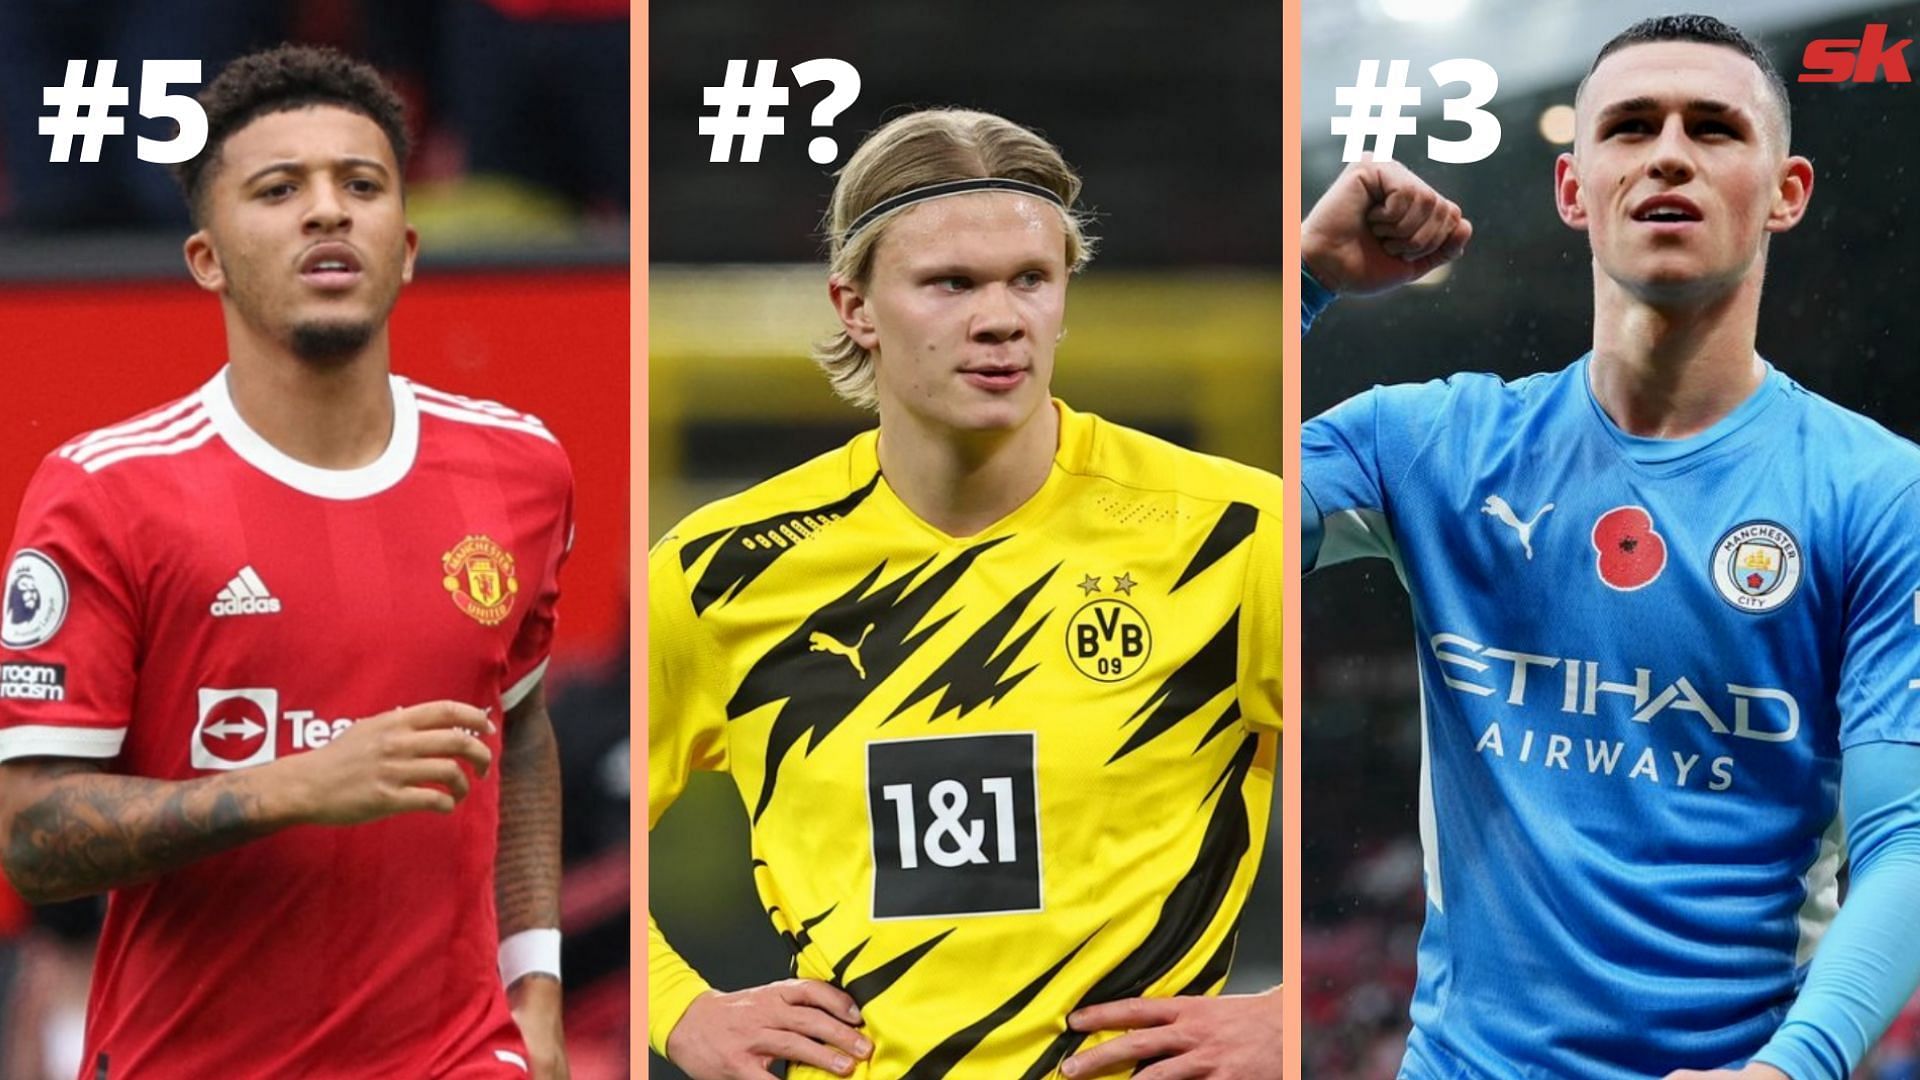 Jadon Sancho, Erling Haaland and Phil Foden all feature in the top five